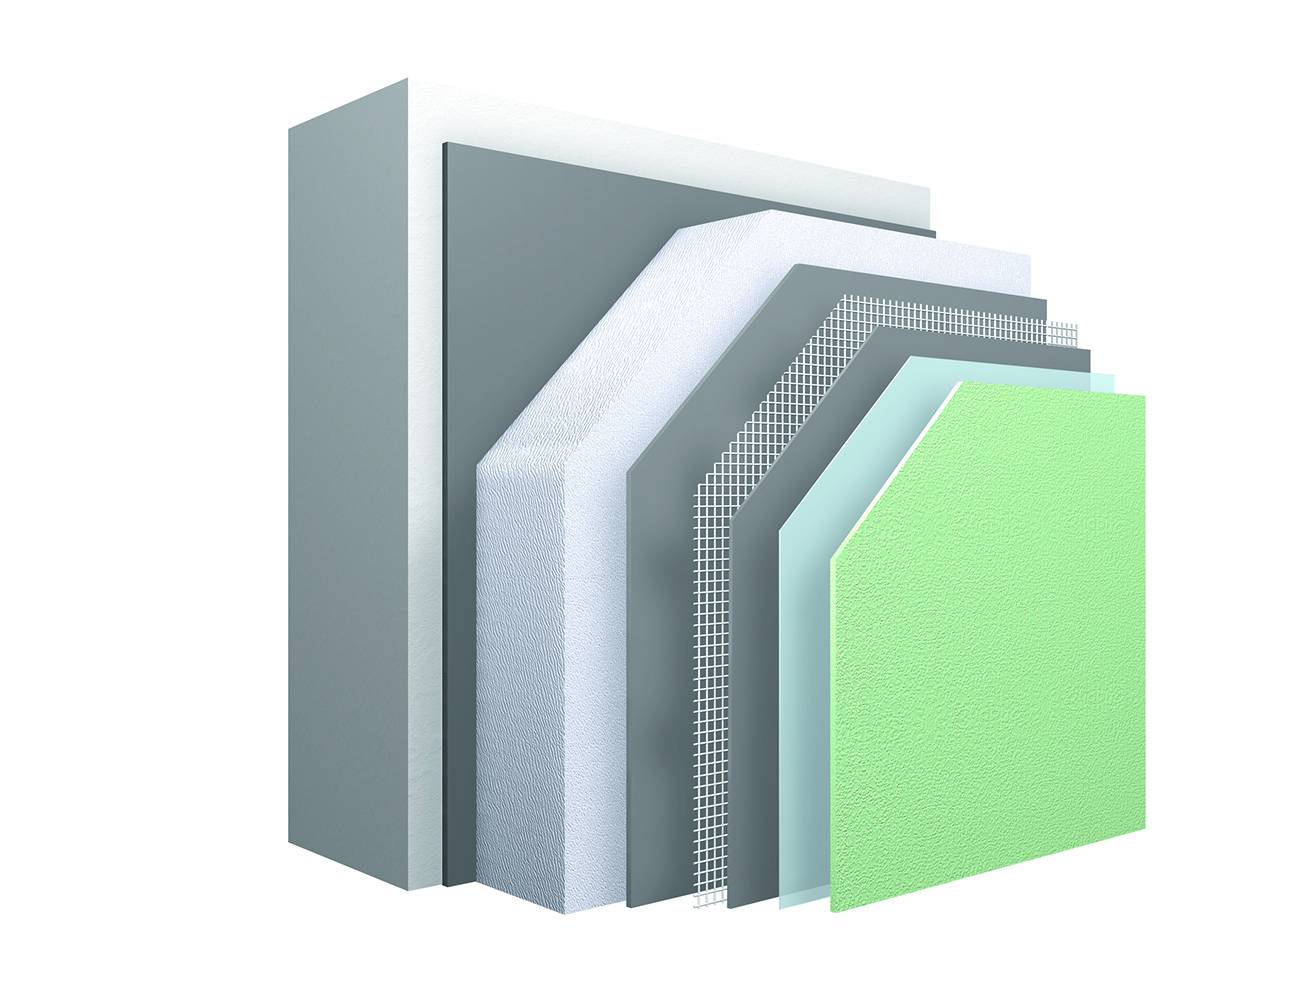 StoTherm Vario K, adhesively and mechanically fixed, external wall insulation system